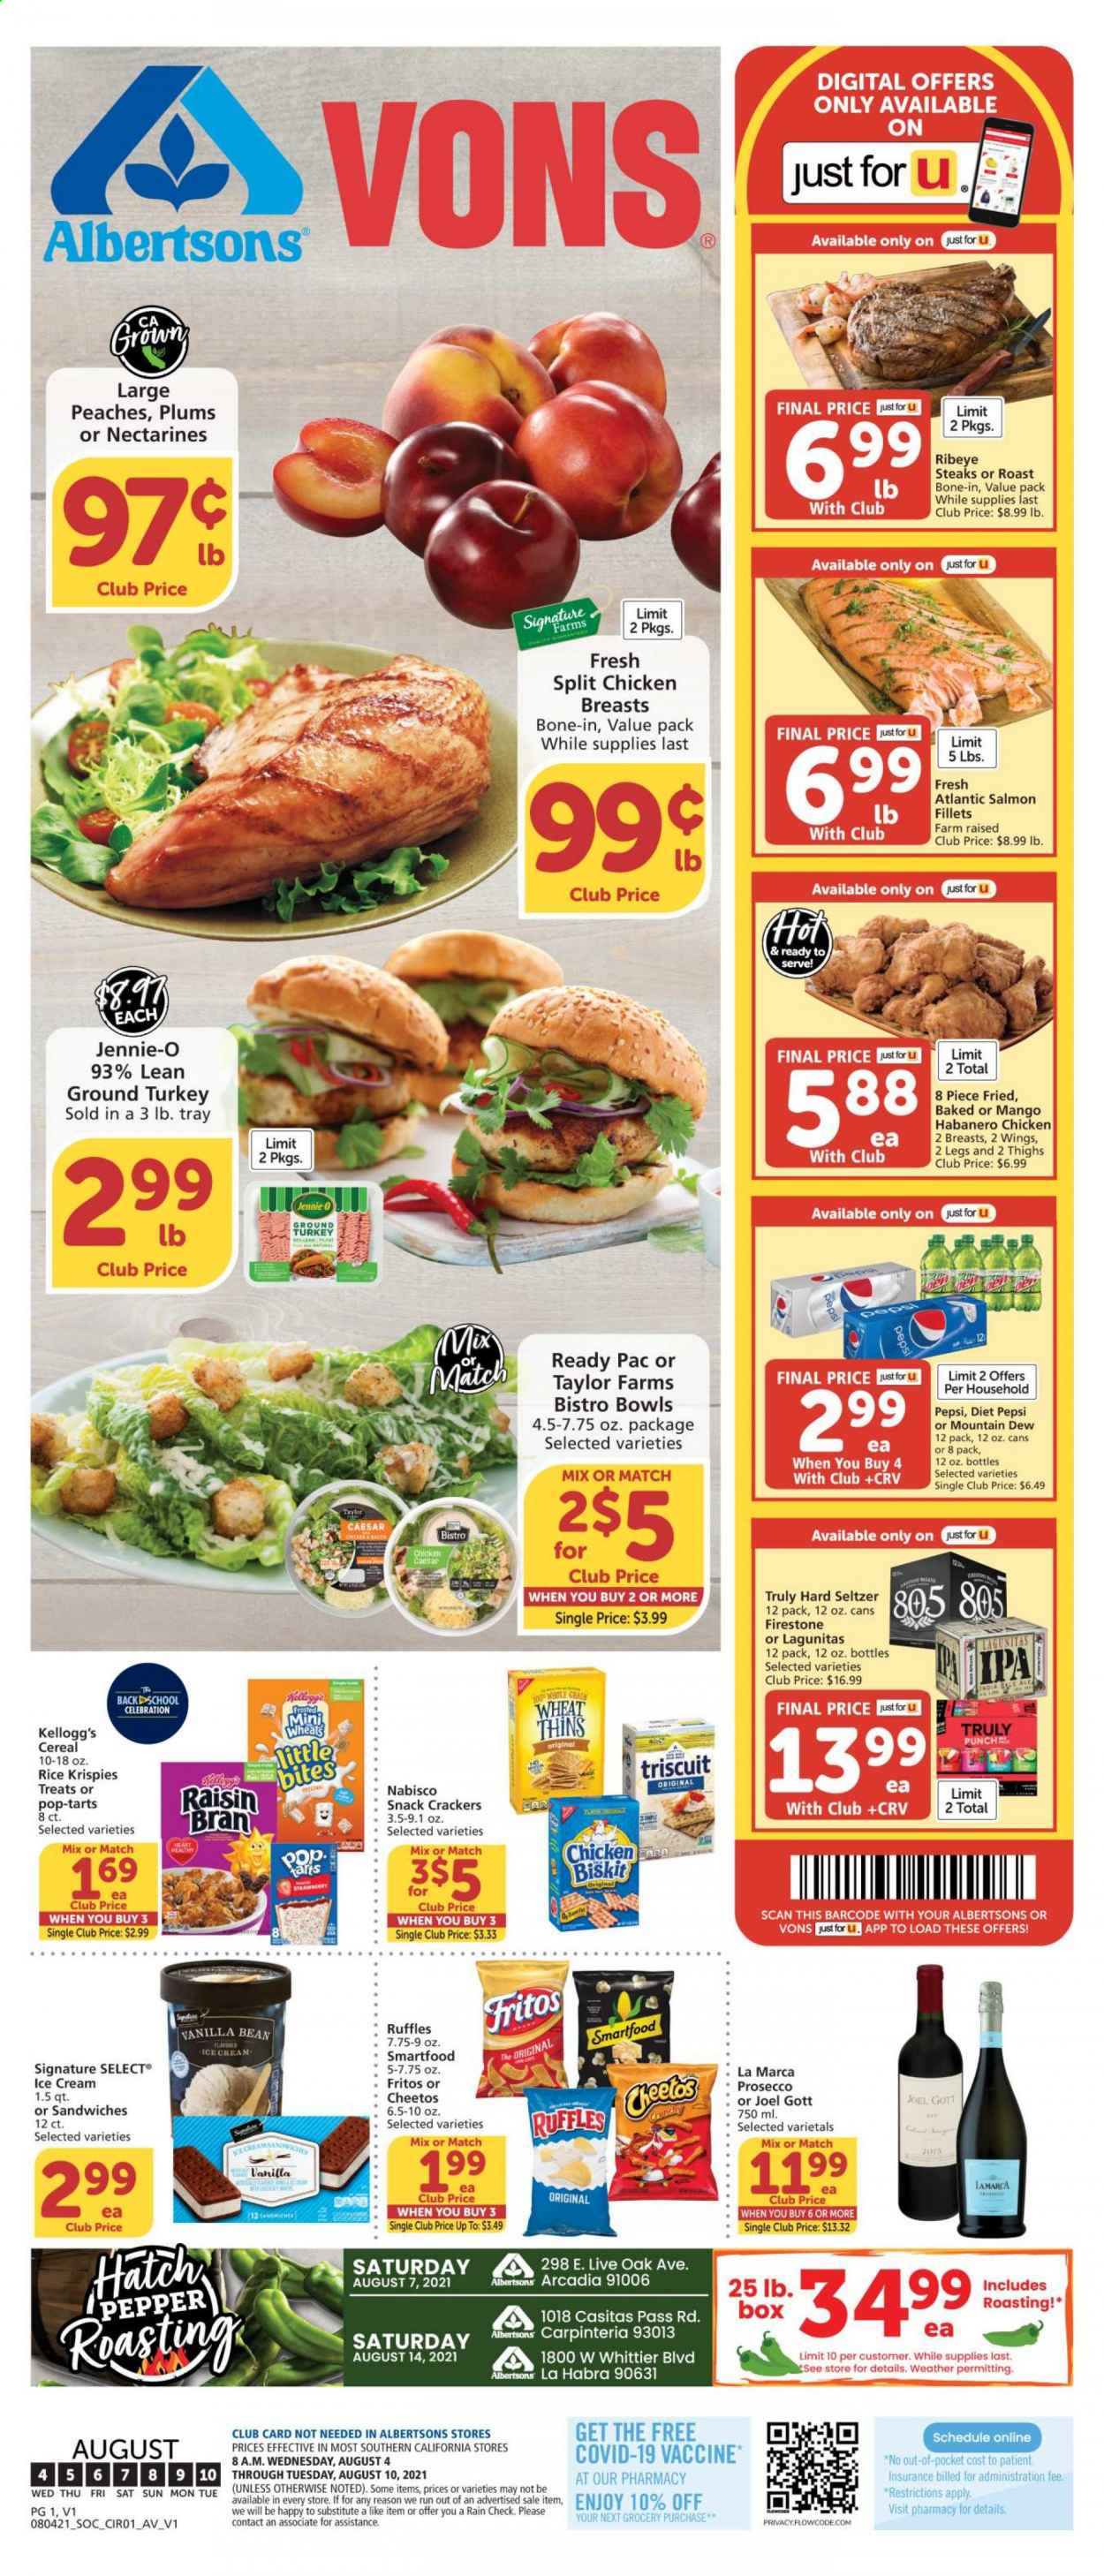 thumbnail - Albertsons Flyer - 08/04/2021 - 08/10/2021 - Sales products - plums, salmon, salmon fillet, sandwich, habanero chicken, Ready Pac, ice cream, snack, Celebration, crackers, Kellogg's, Pop-Tarts, Fritos, Cheetos, Smartfood, Thins, Ruffles, cereals, Rice Krispies, Mountain Dew, Pepsi, Diet Pepsi, prosecco, punch, Hard Seltzer, TRULY, IPA, ground turkey, chicken breasts, beef meat, steak, ribeye steak, nectarines, peaches. Page 1.